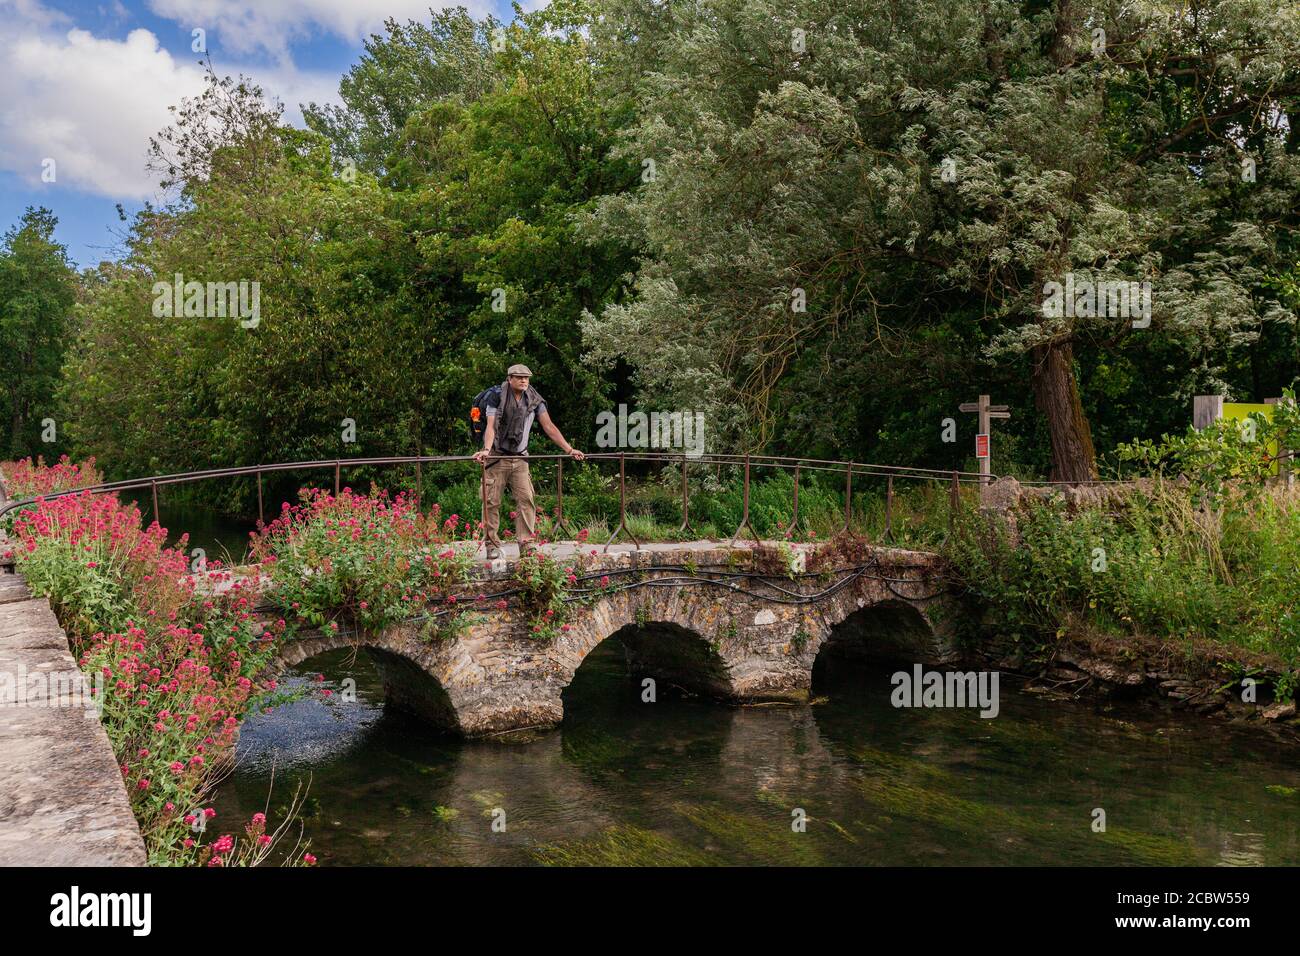 Traveler standing on an old stone bridge on the River Colne flowers in the foreground at Bibury, Cotswold, England Stock Photo